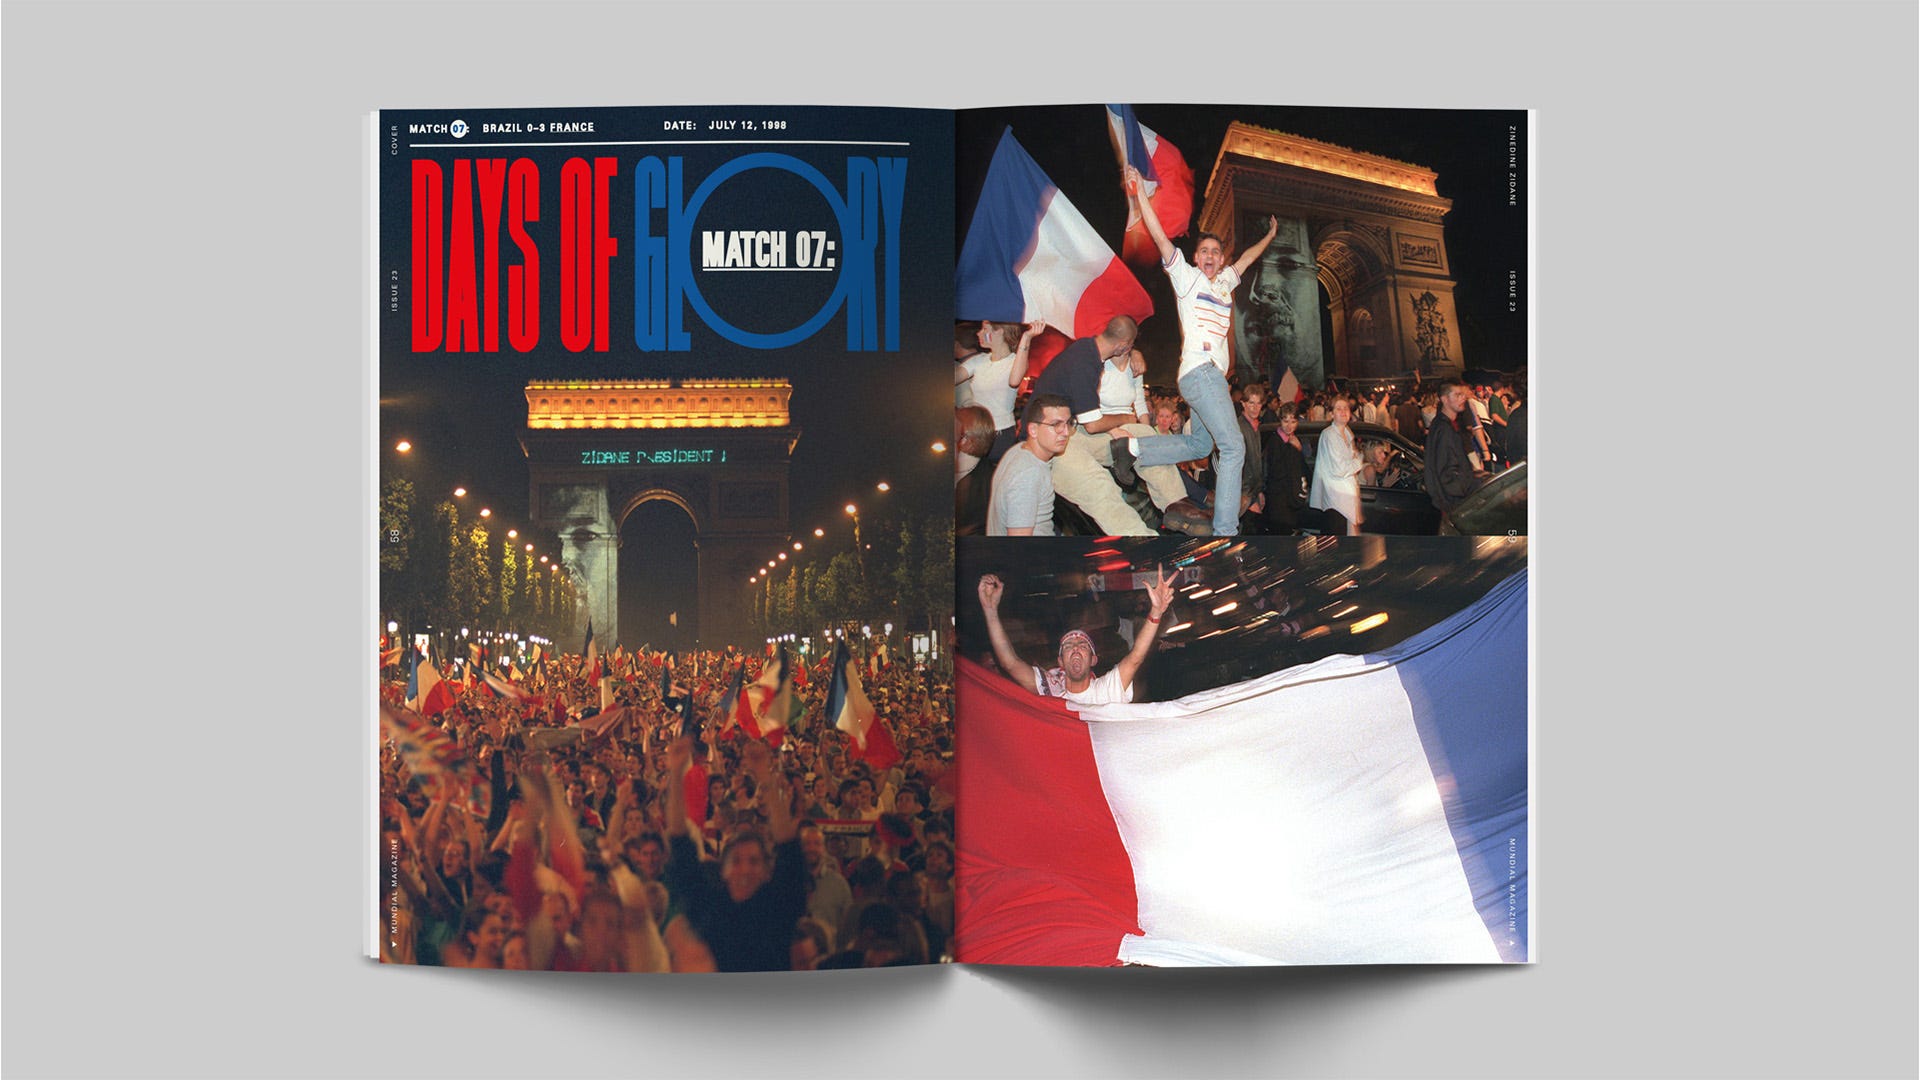 THE PHOTOS OF FRANCE WINNING THE WORLD CUP